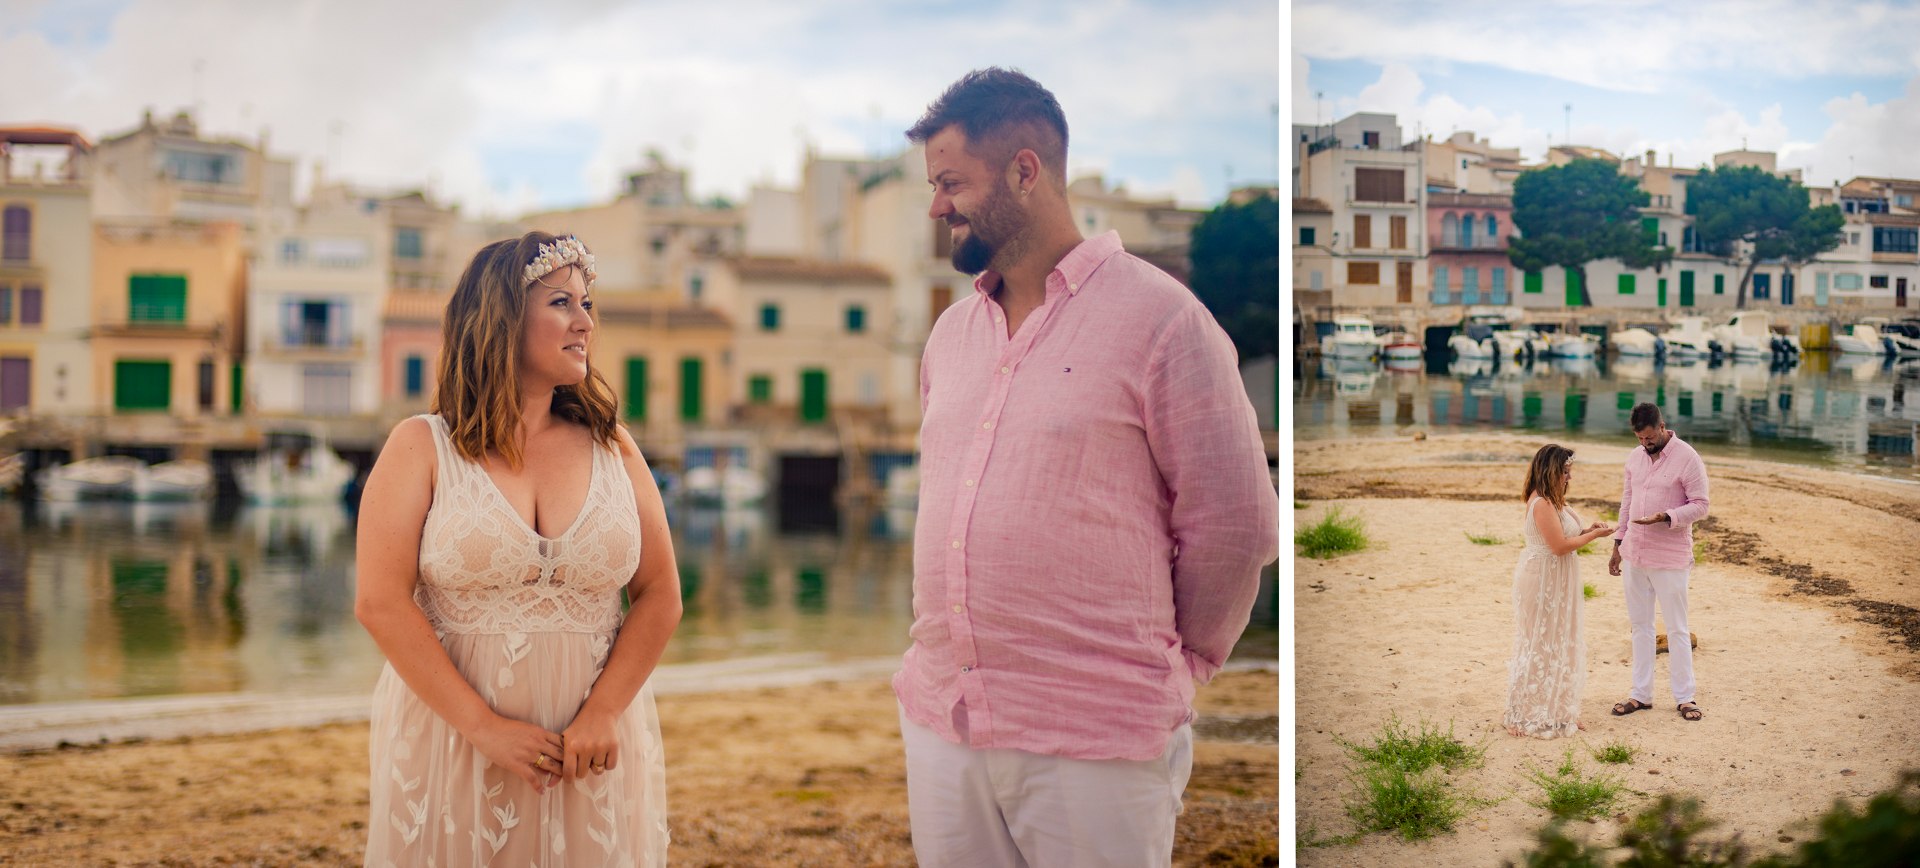 Mallorca elopement in Portocolom - Bride and groom in front of pictoresque town